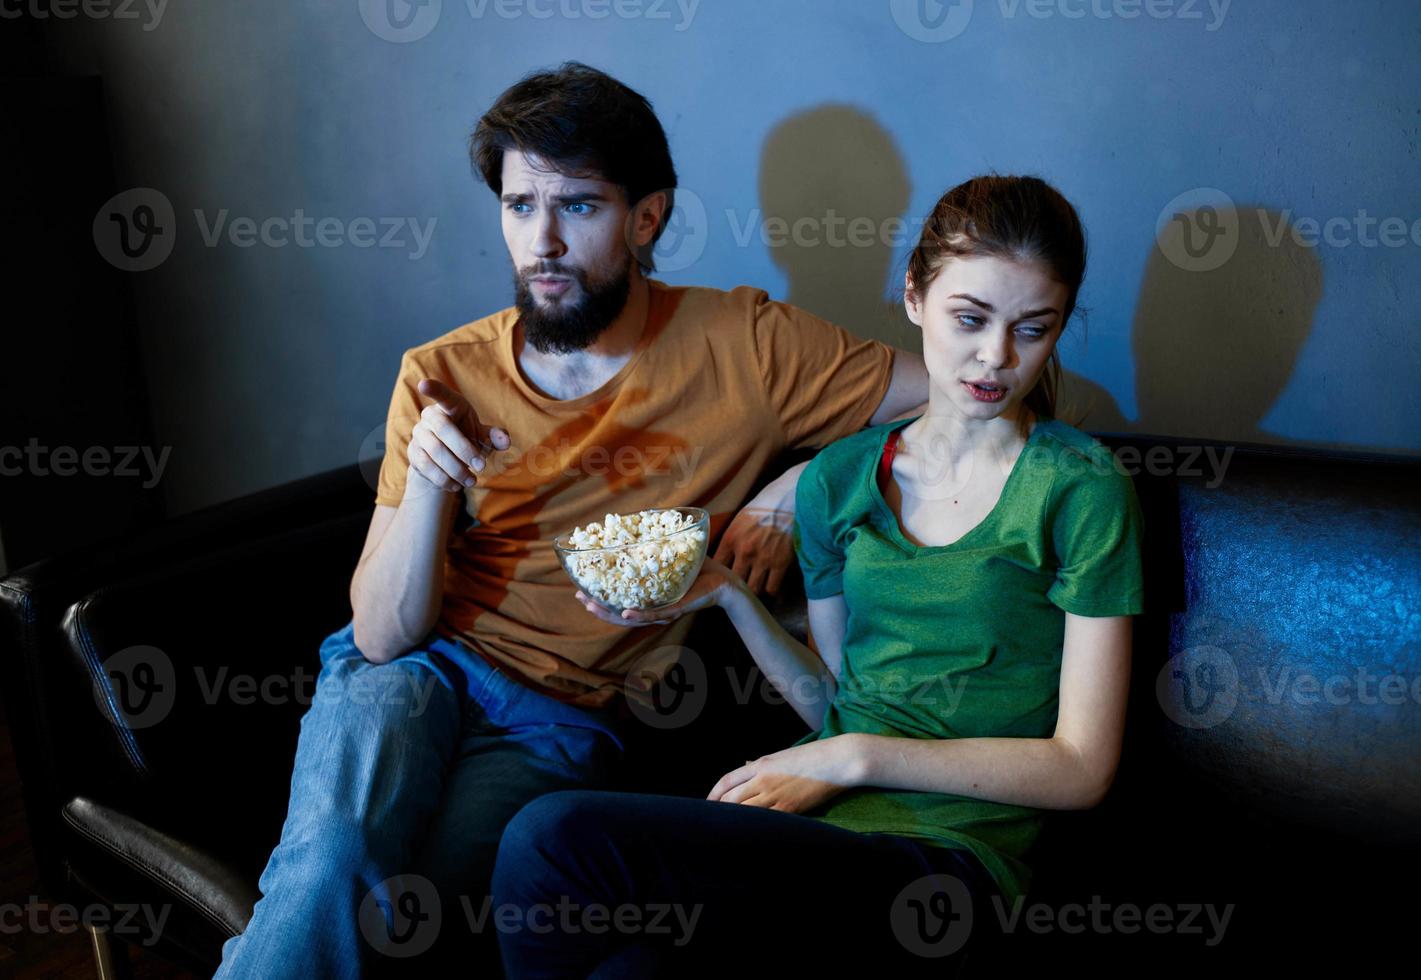 A woman and a man with popcorn on a leather sofa indoors watching TV in the evening photo